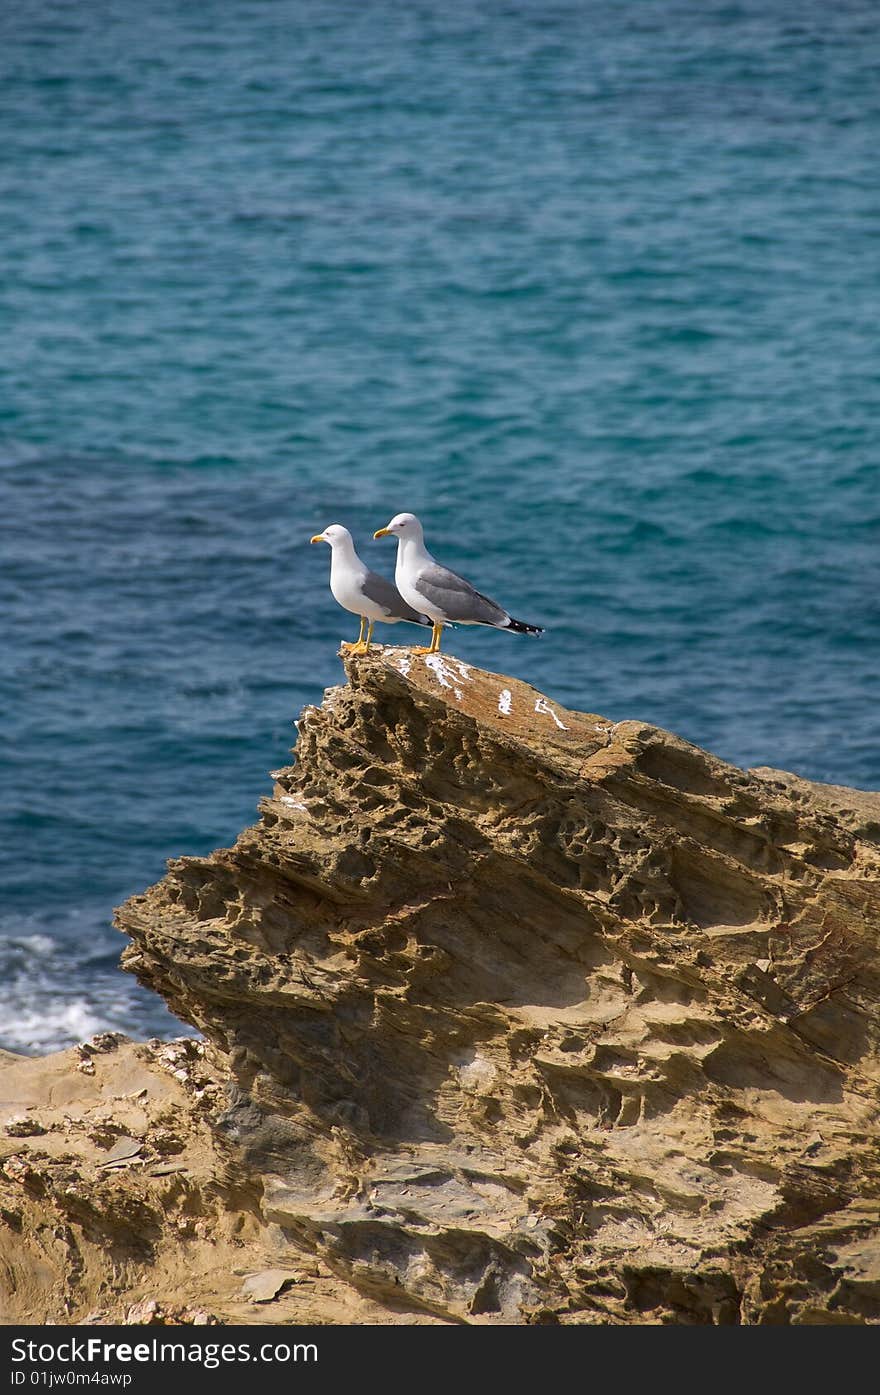 Couple of seagulls standing on a cliff, watching the ooean